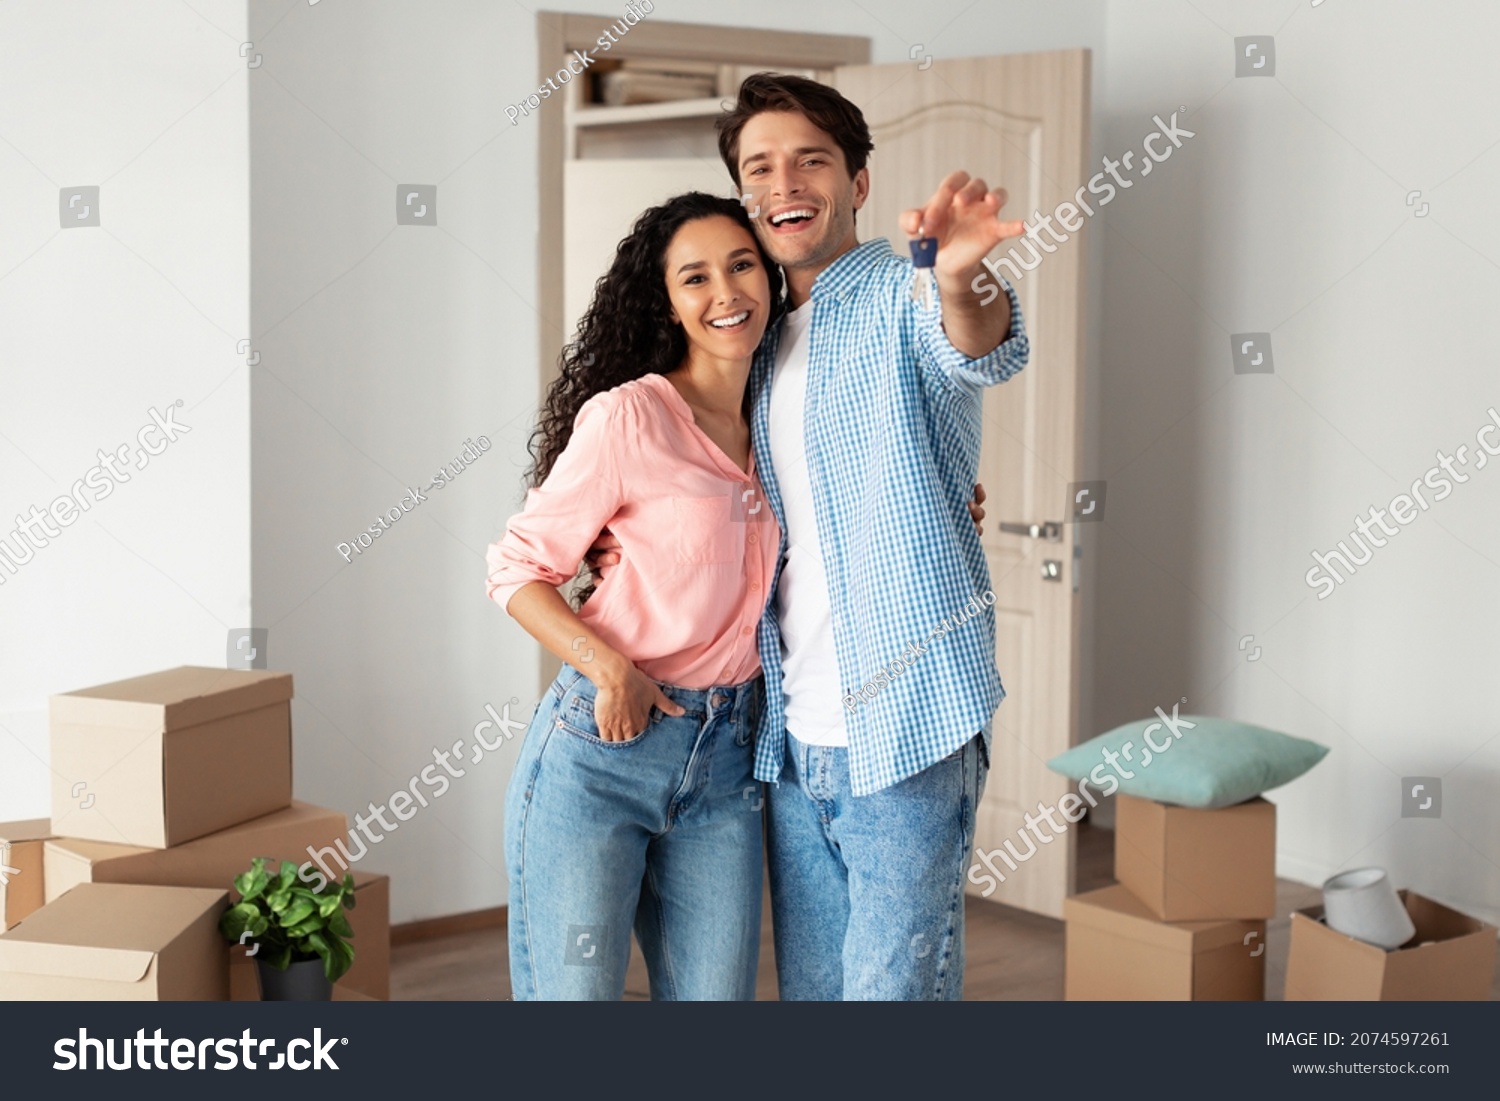 House Ownership. Portrait Of Happy Young Couple Holding Showing Key Standing In New Flat, Cheerful Guy And Lady Posing Hugging After Moving In Own Apartment. Insurance, Real Estate, Mortgage Concept #2074597261